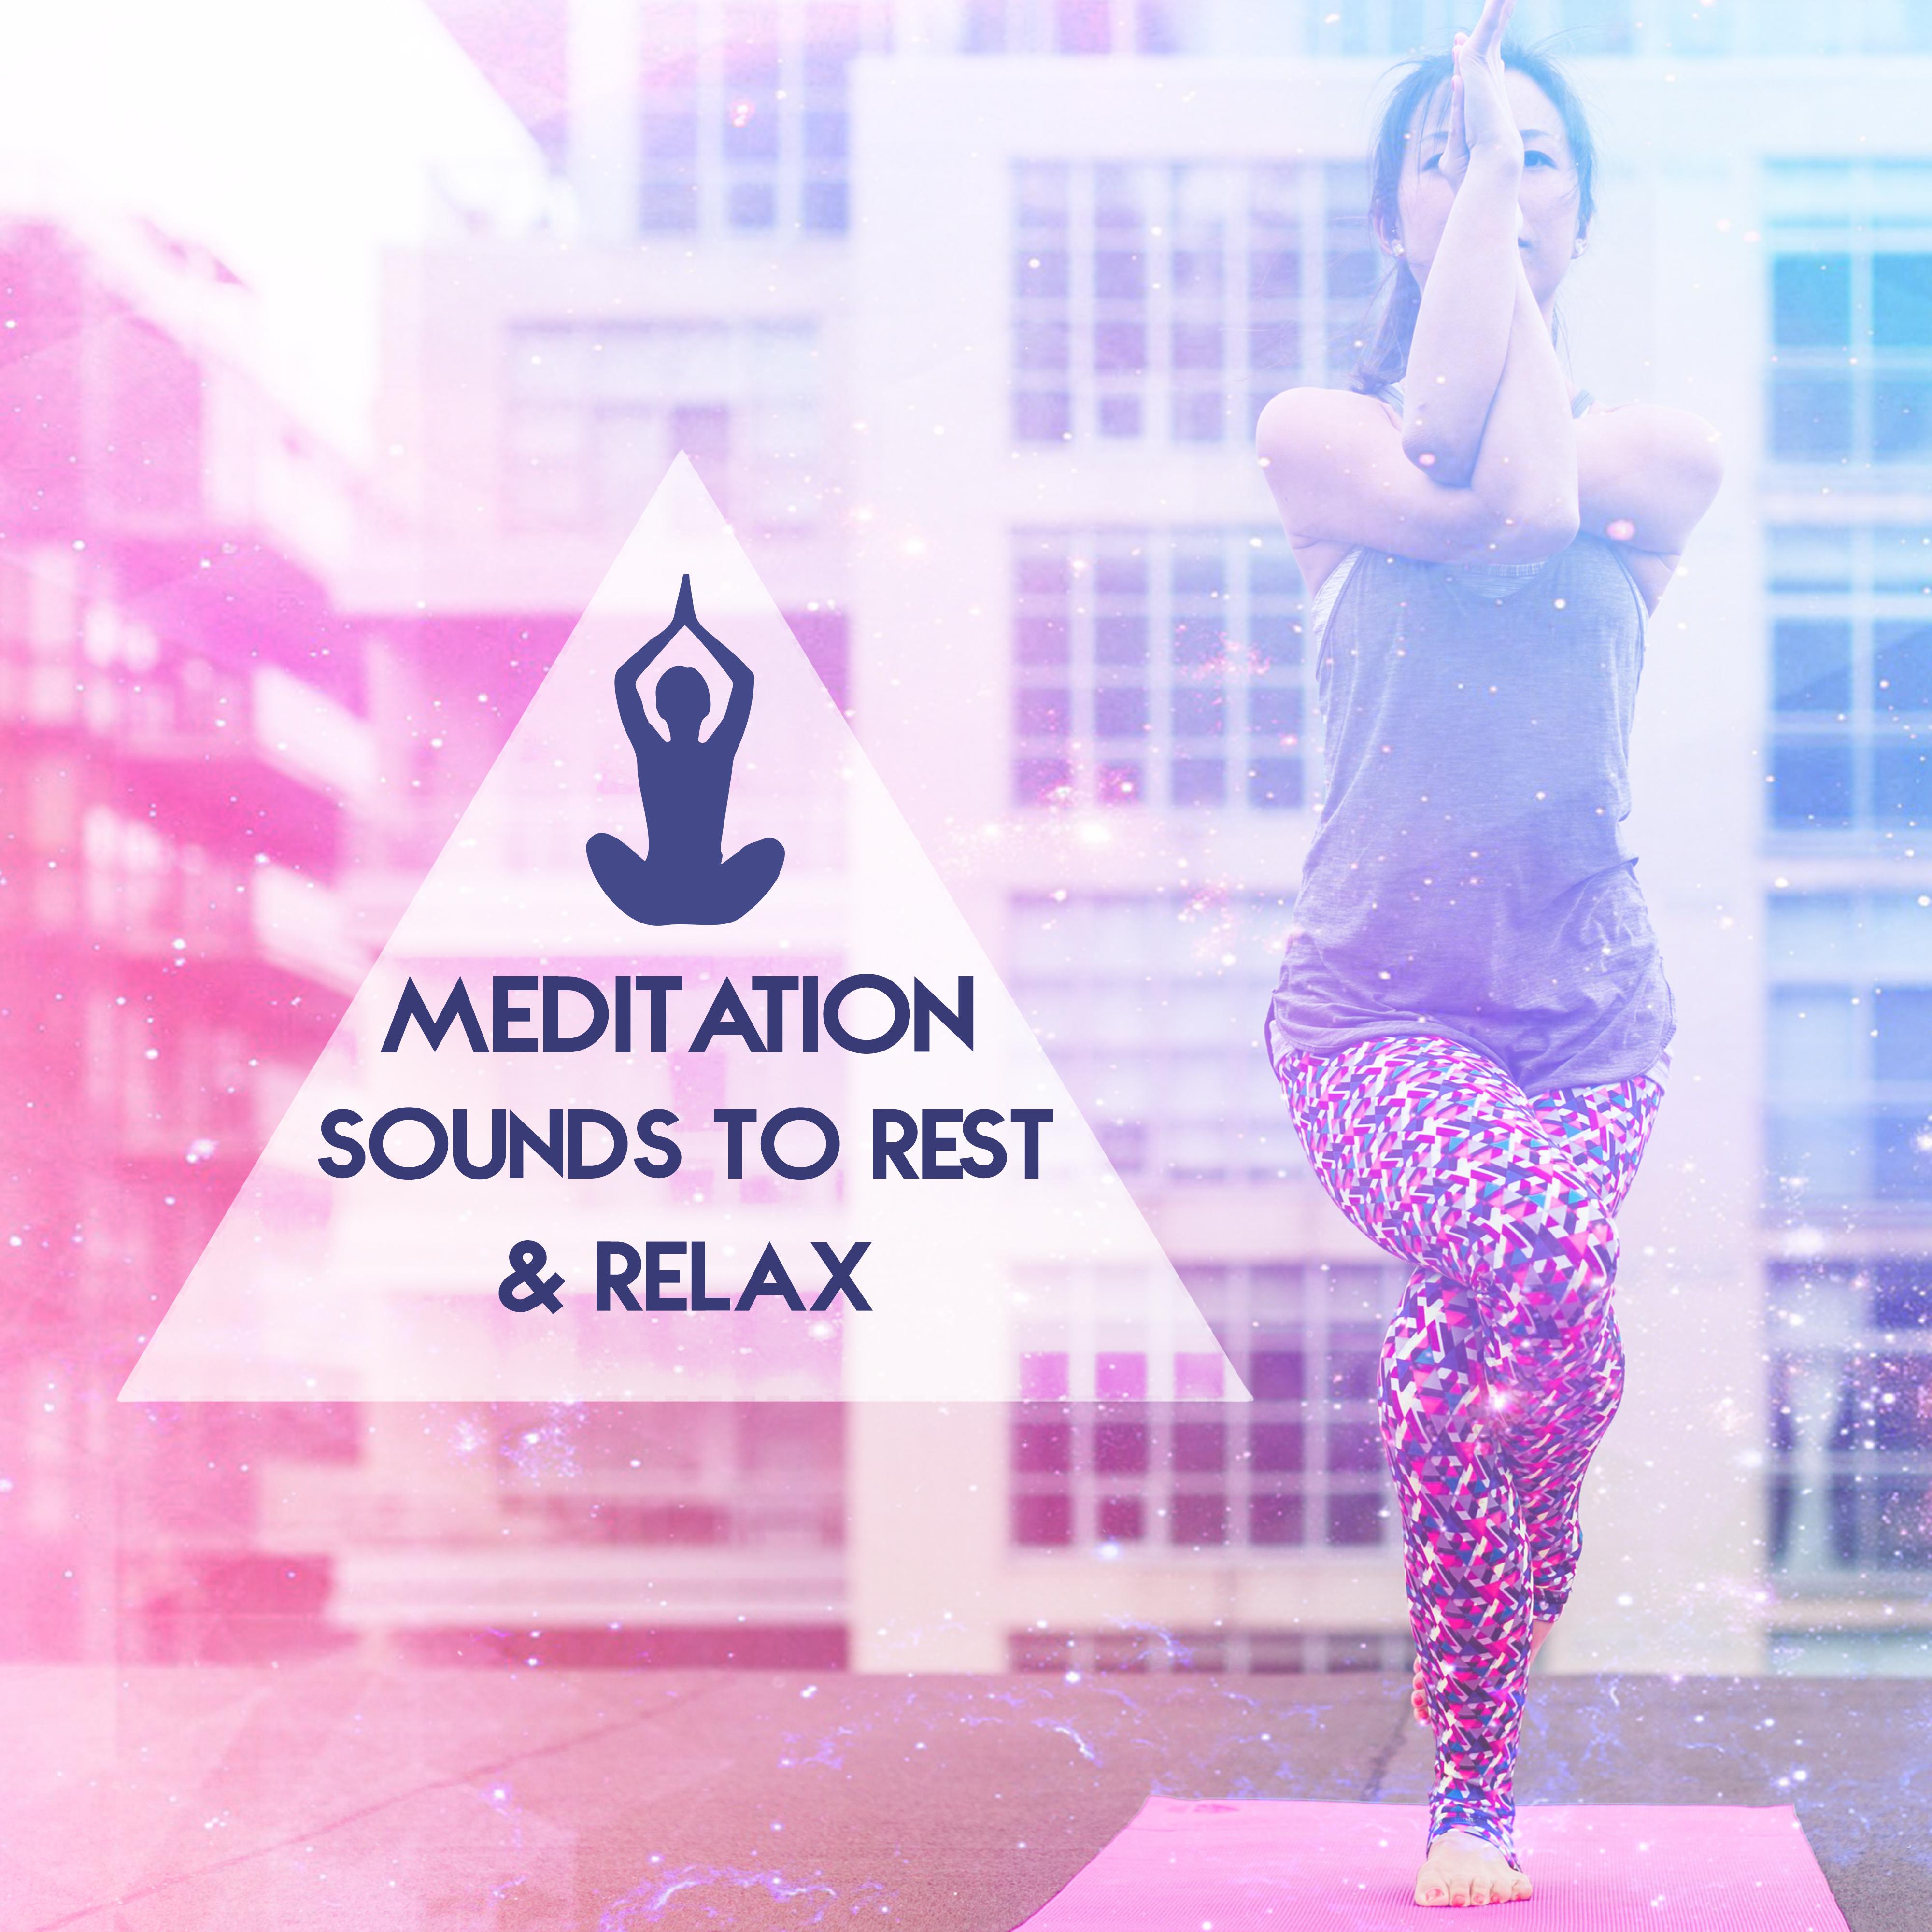 Meditation Sounds to Rest & Relax – Time to Meditate, New Age Songs to Relax, Rest with Peaceful Music